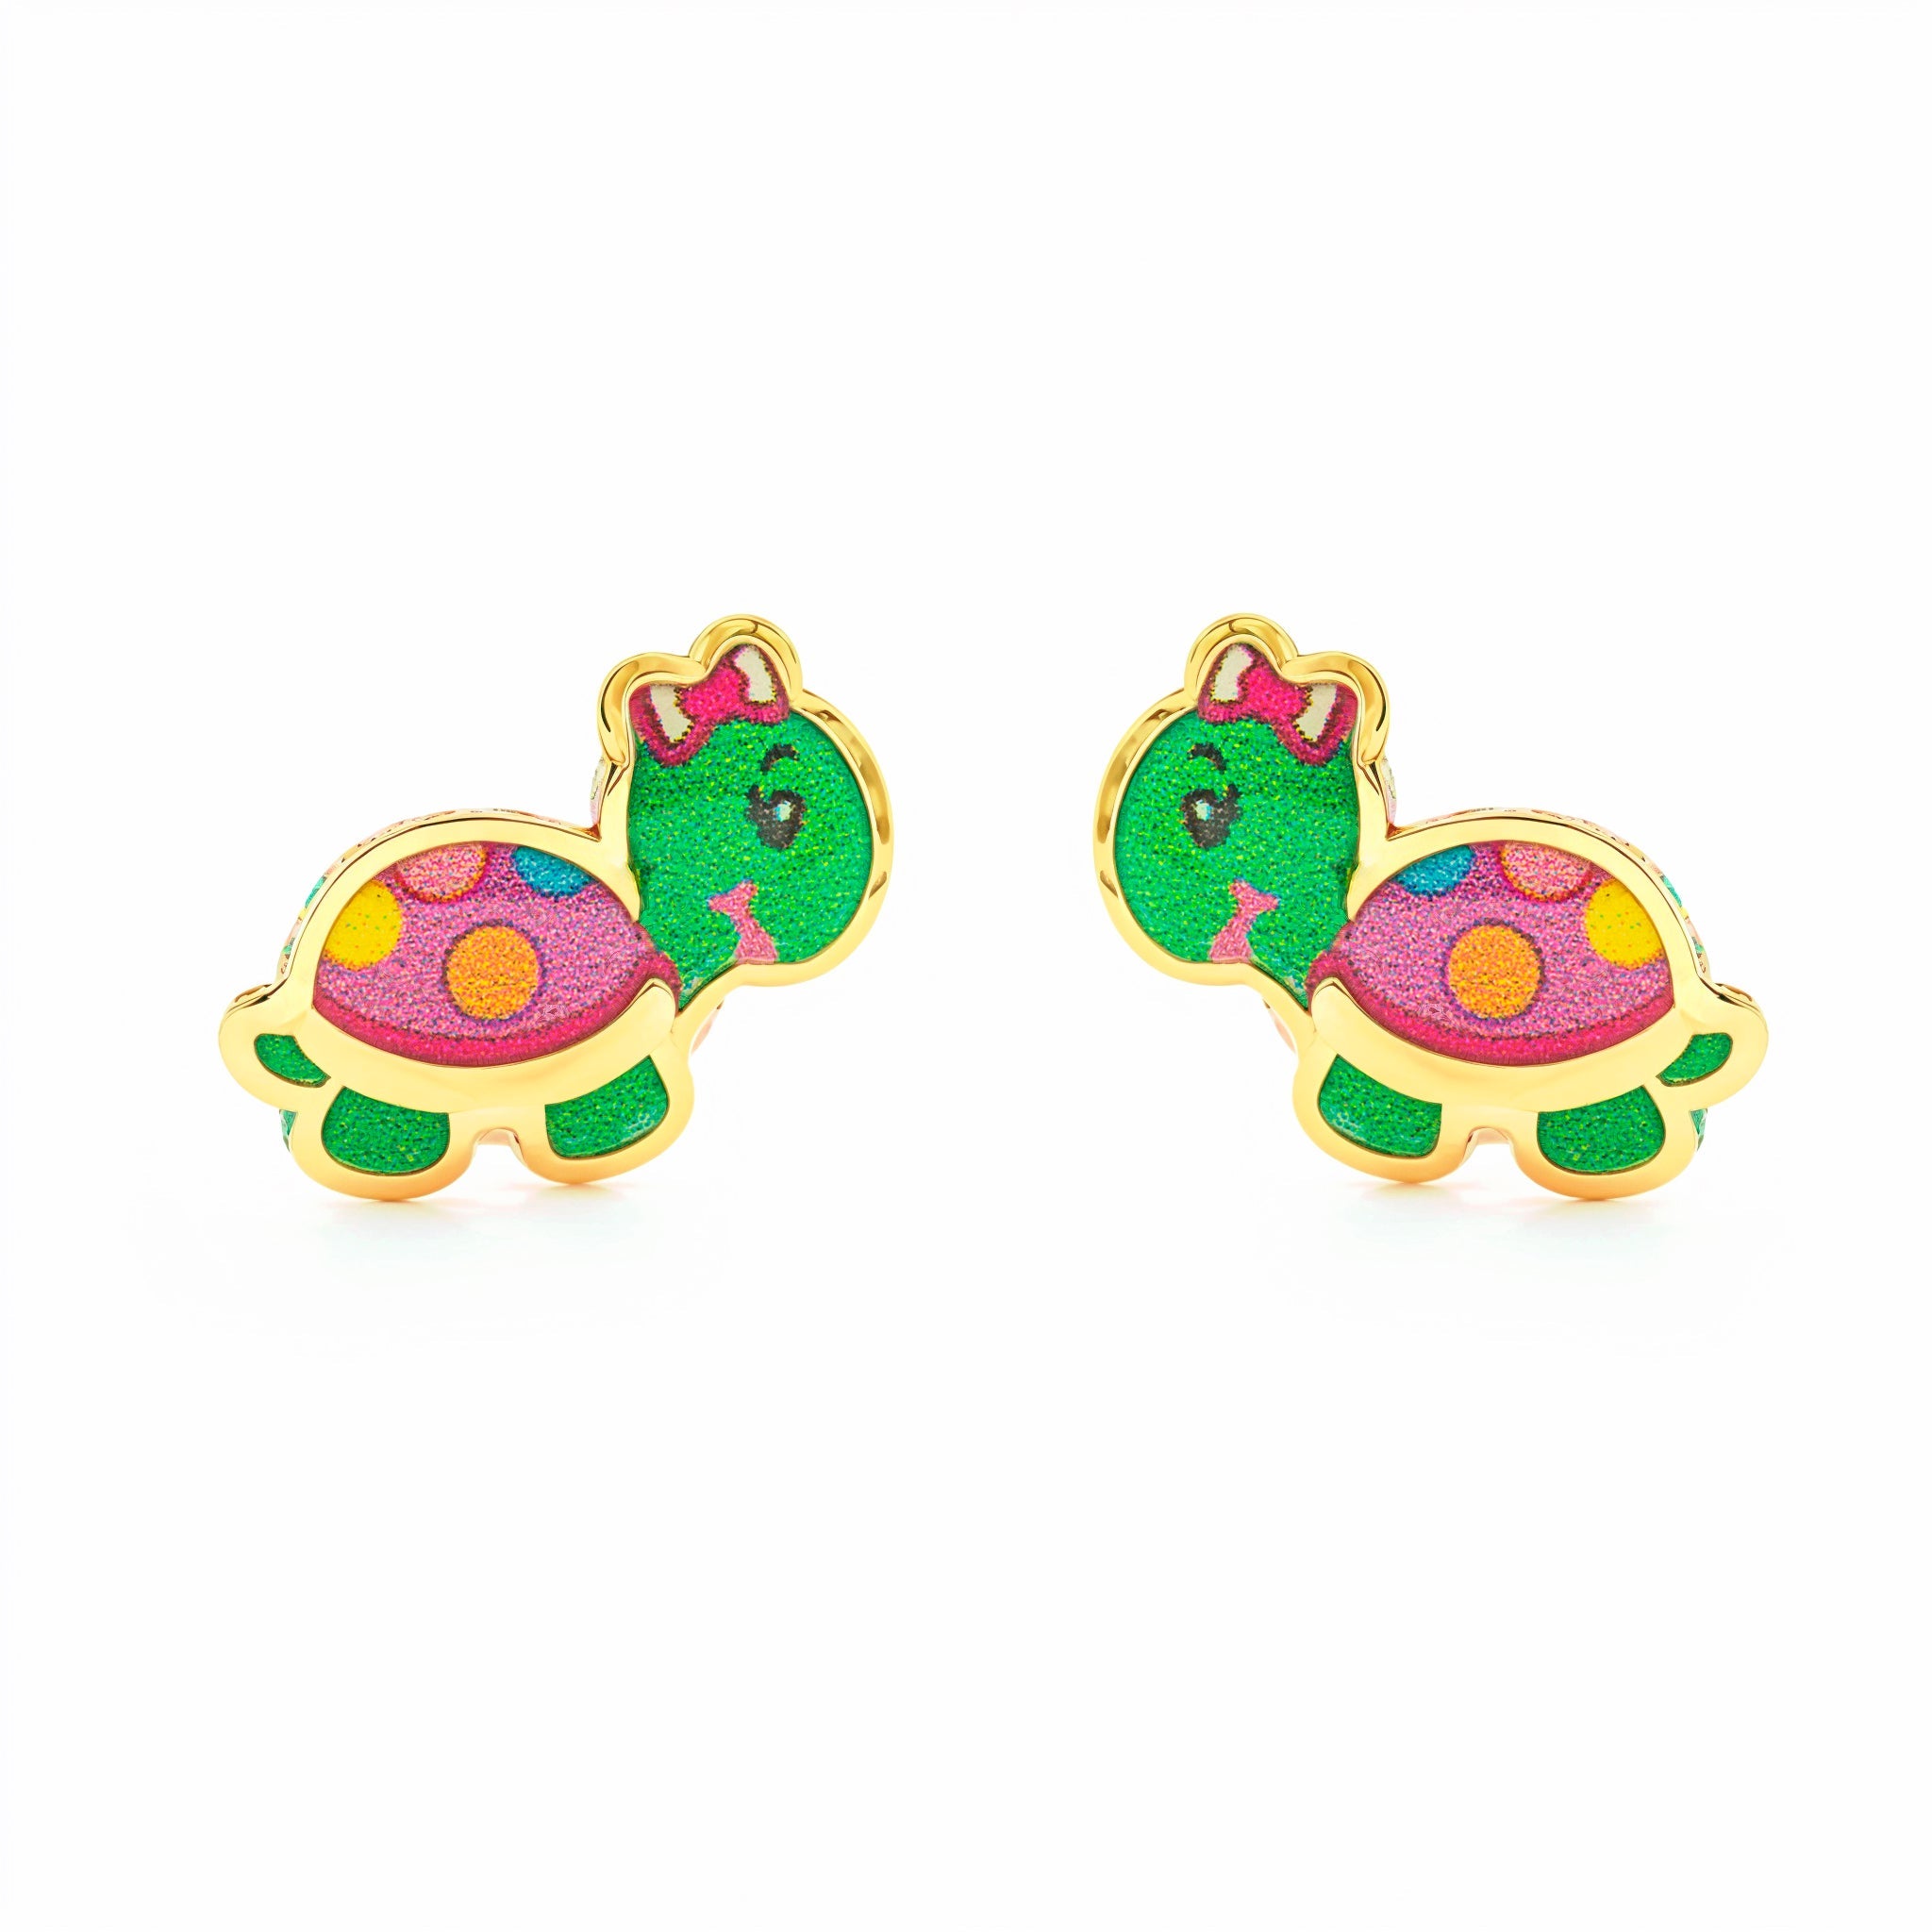 Girl's 9K Yellow Gold Earrings with Bright Multicolor Enamel